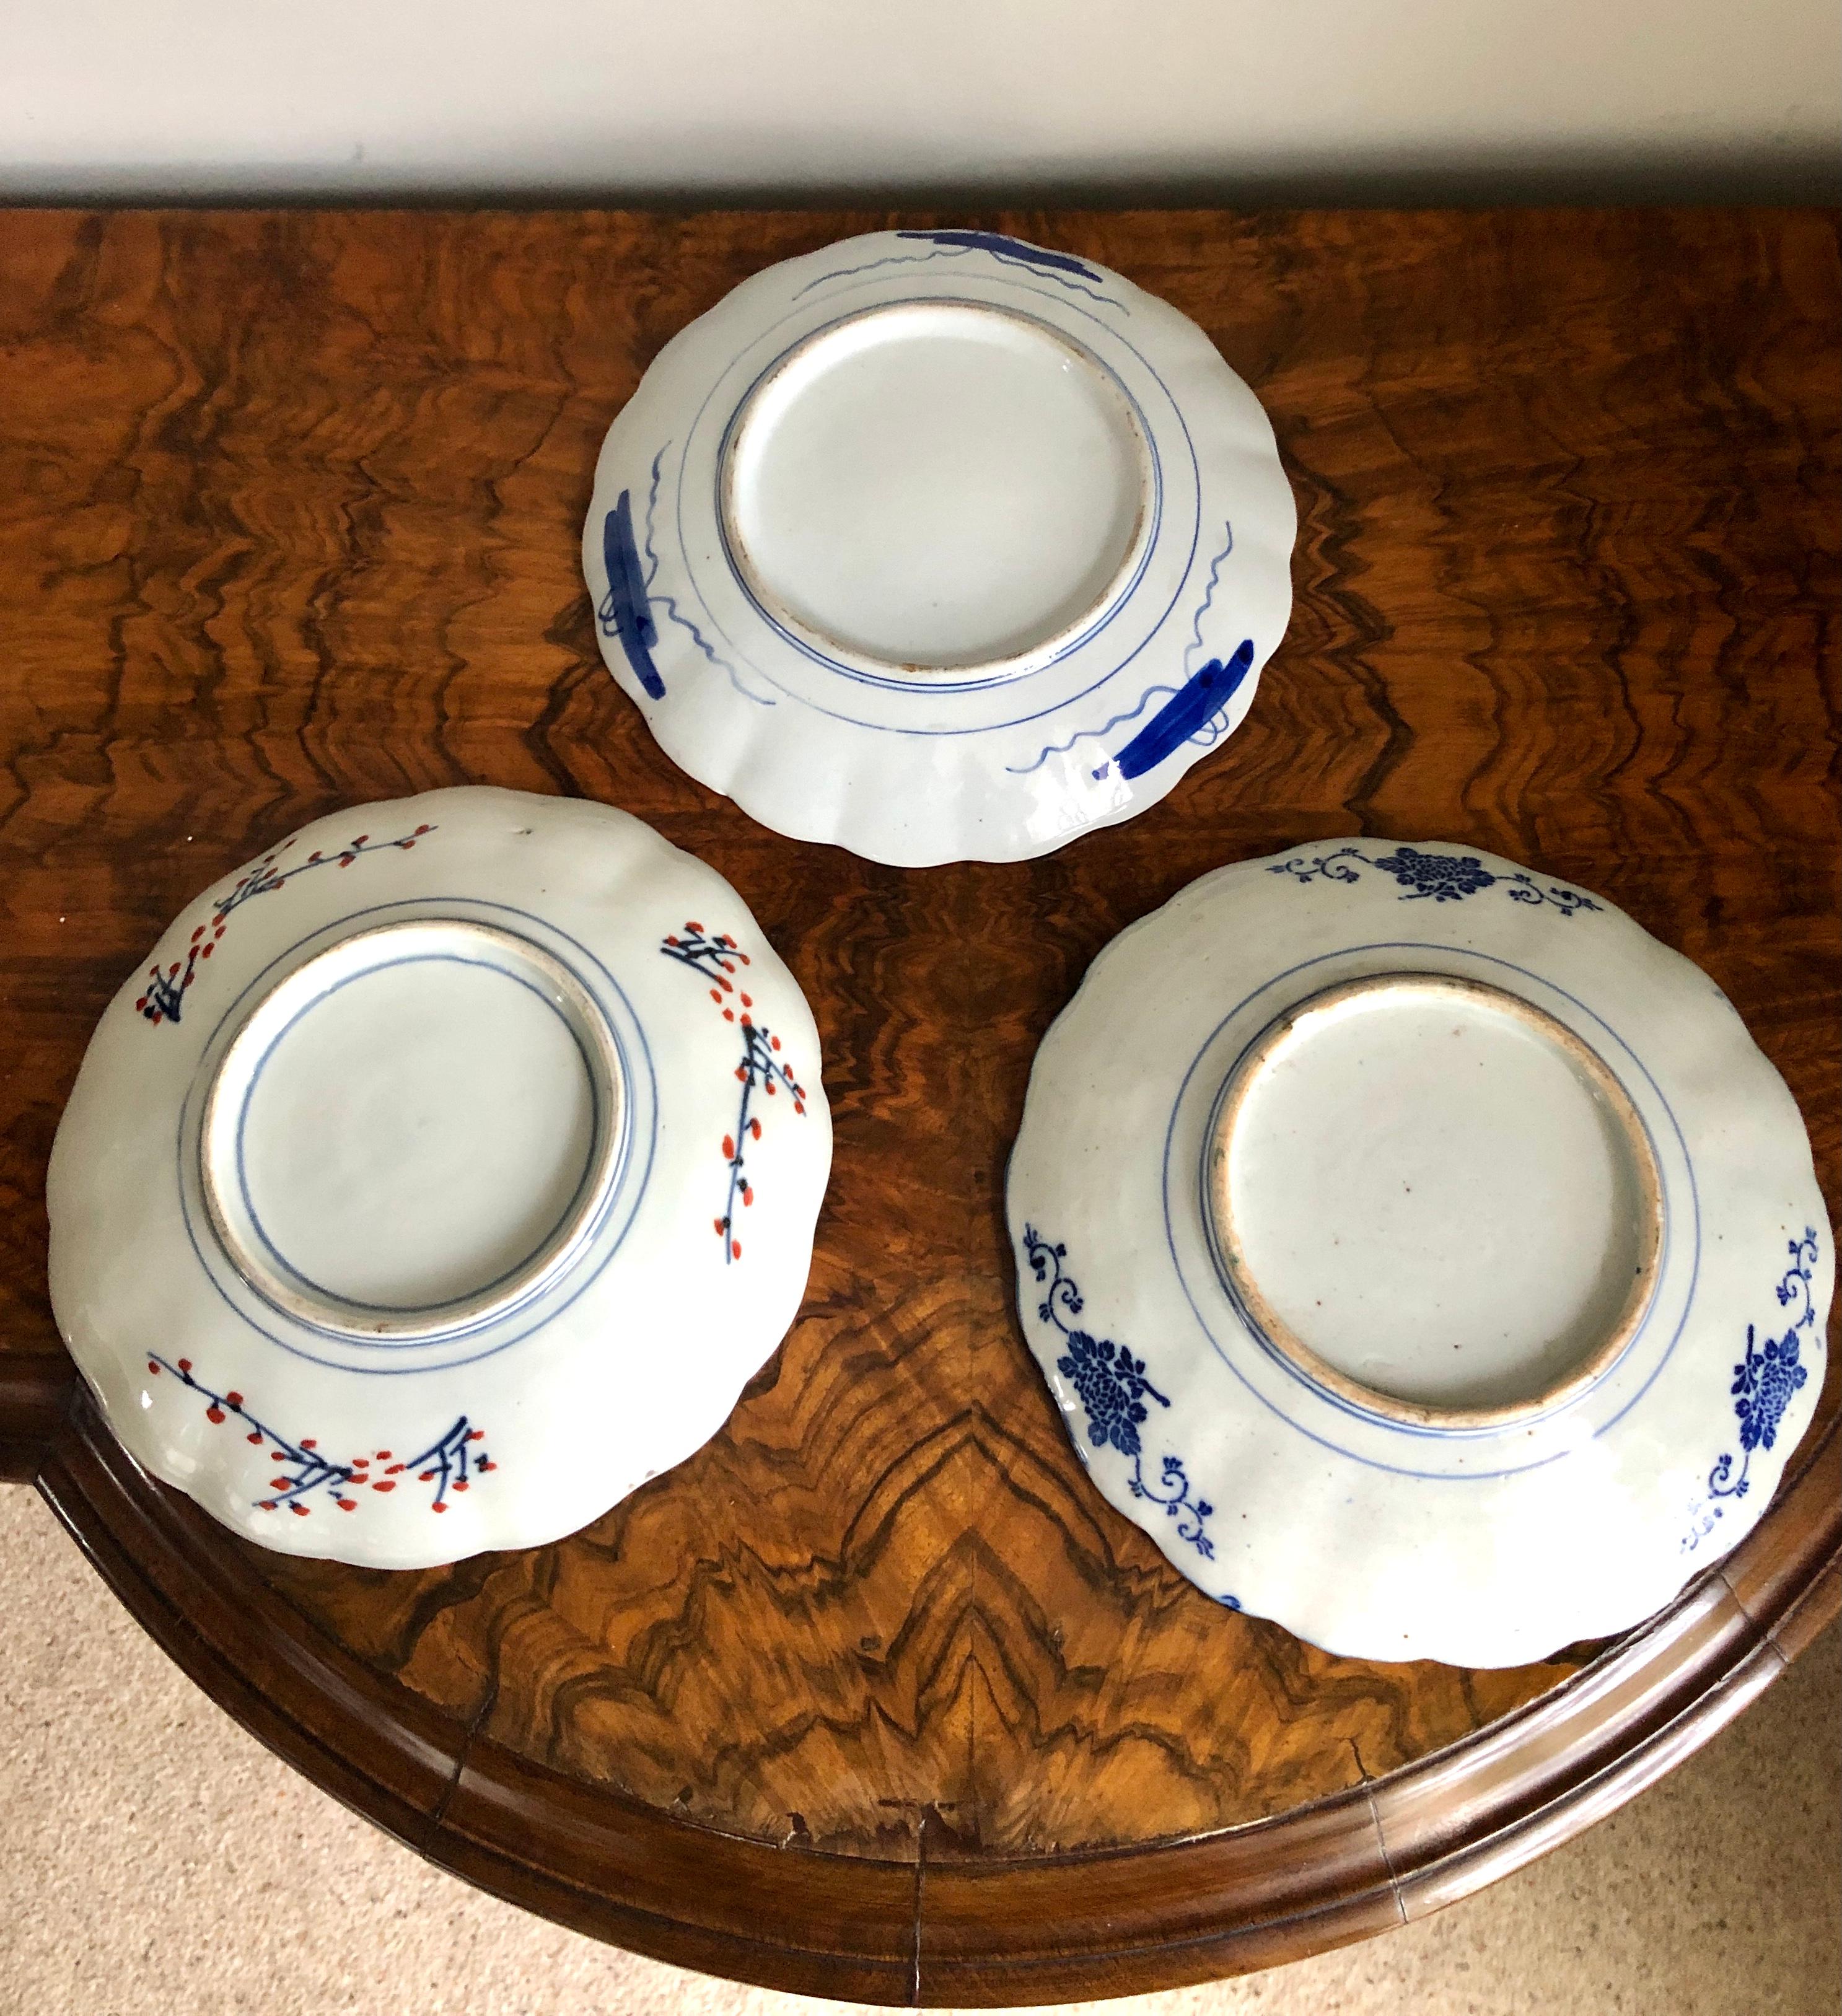 A set of three Imari Japanese plates all being very vibrant and prettilly hand painted with scenes of flowers, leaves and goldfish in red, yellow, green, terracotta, blue and gold. They all boast scalloped edges with painted backs depicting